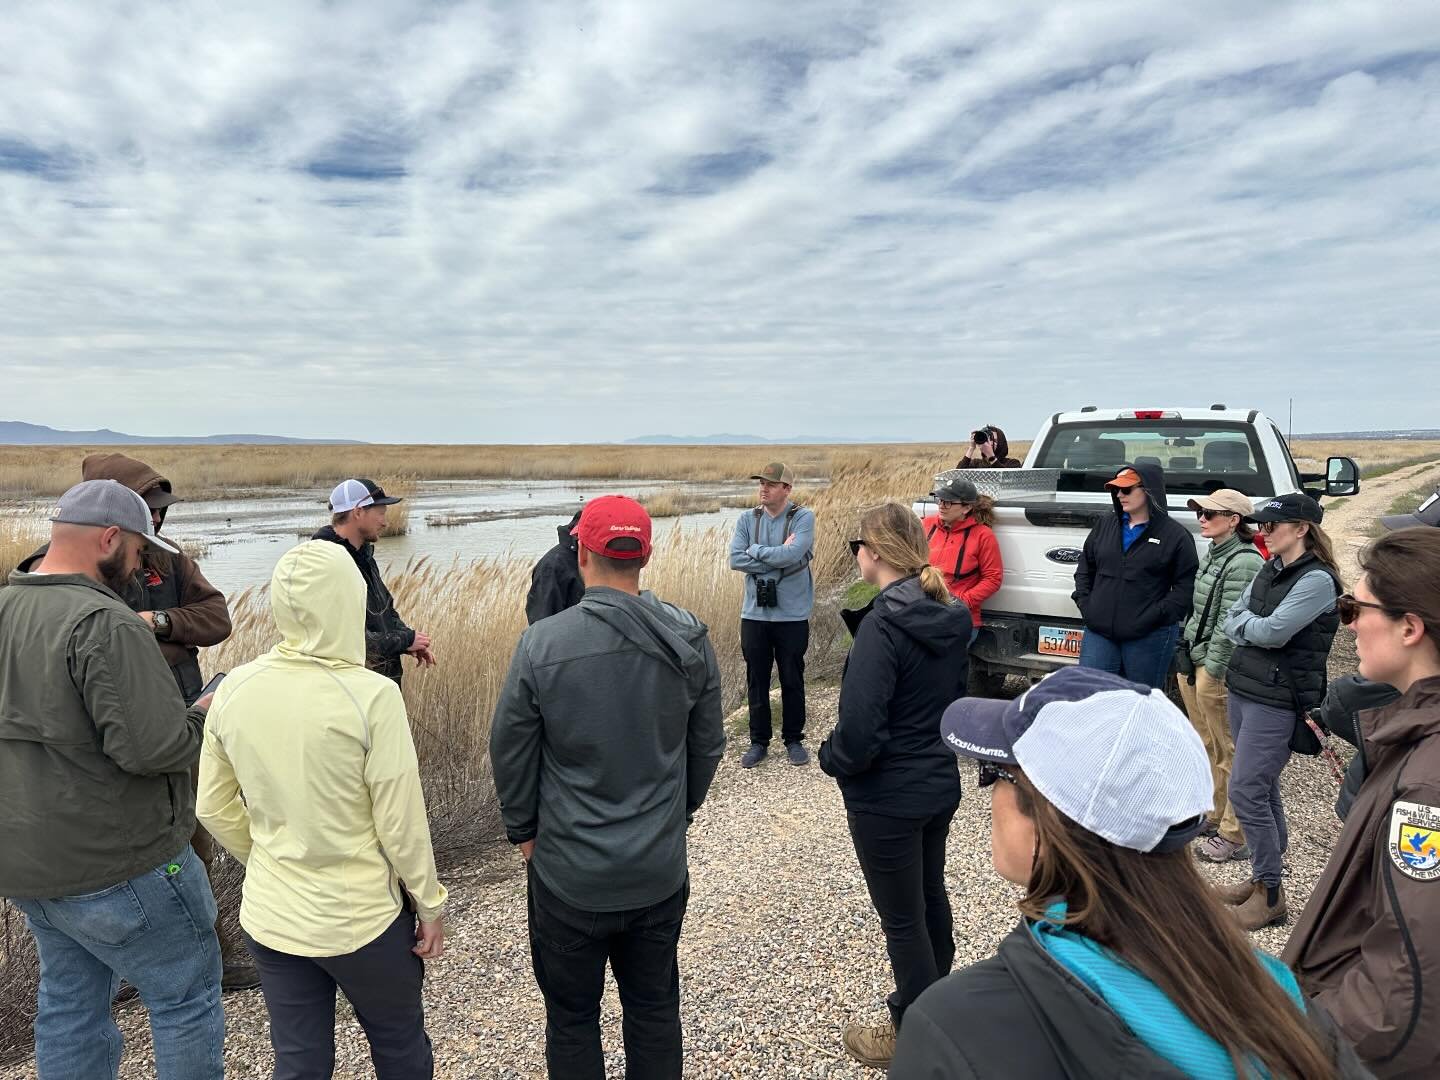 Sageland is honored to host several field trips each year for Great Salt Lake wetland managers representing duck clubs, nature preserves, State Waterfowl Management Areas and the Bear River Migratory Bird Refuge. These hard working people maintain an